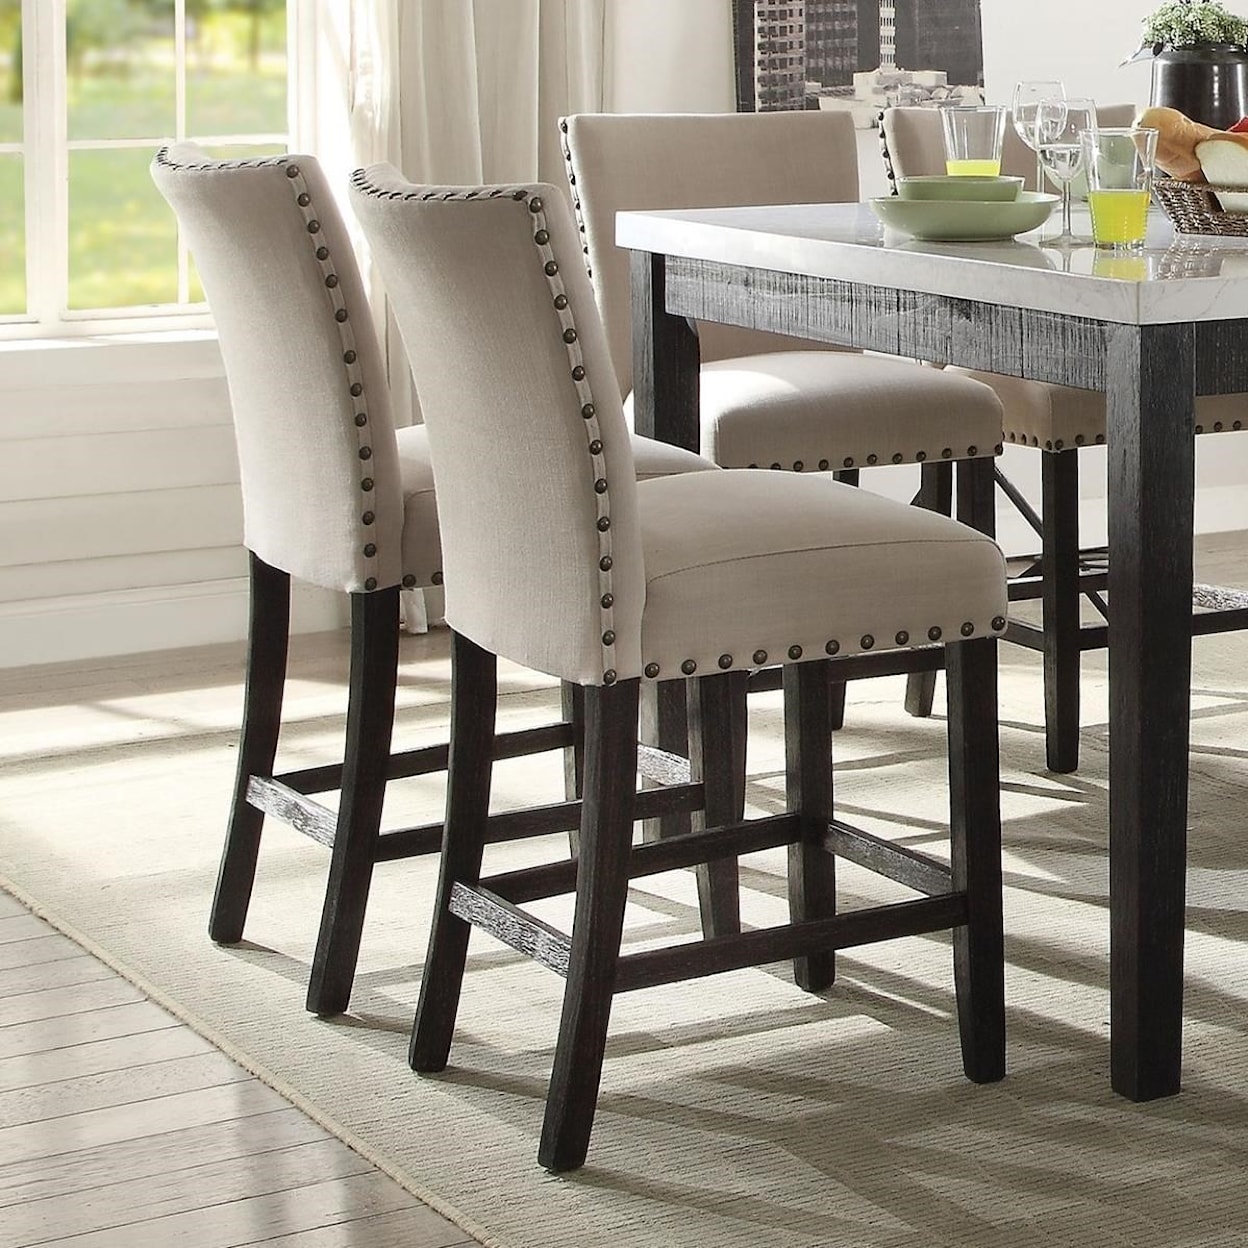 Acme Furniture Nolan Set of 2 Counter Height Chairs